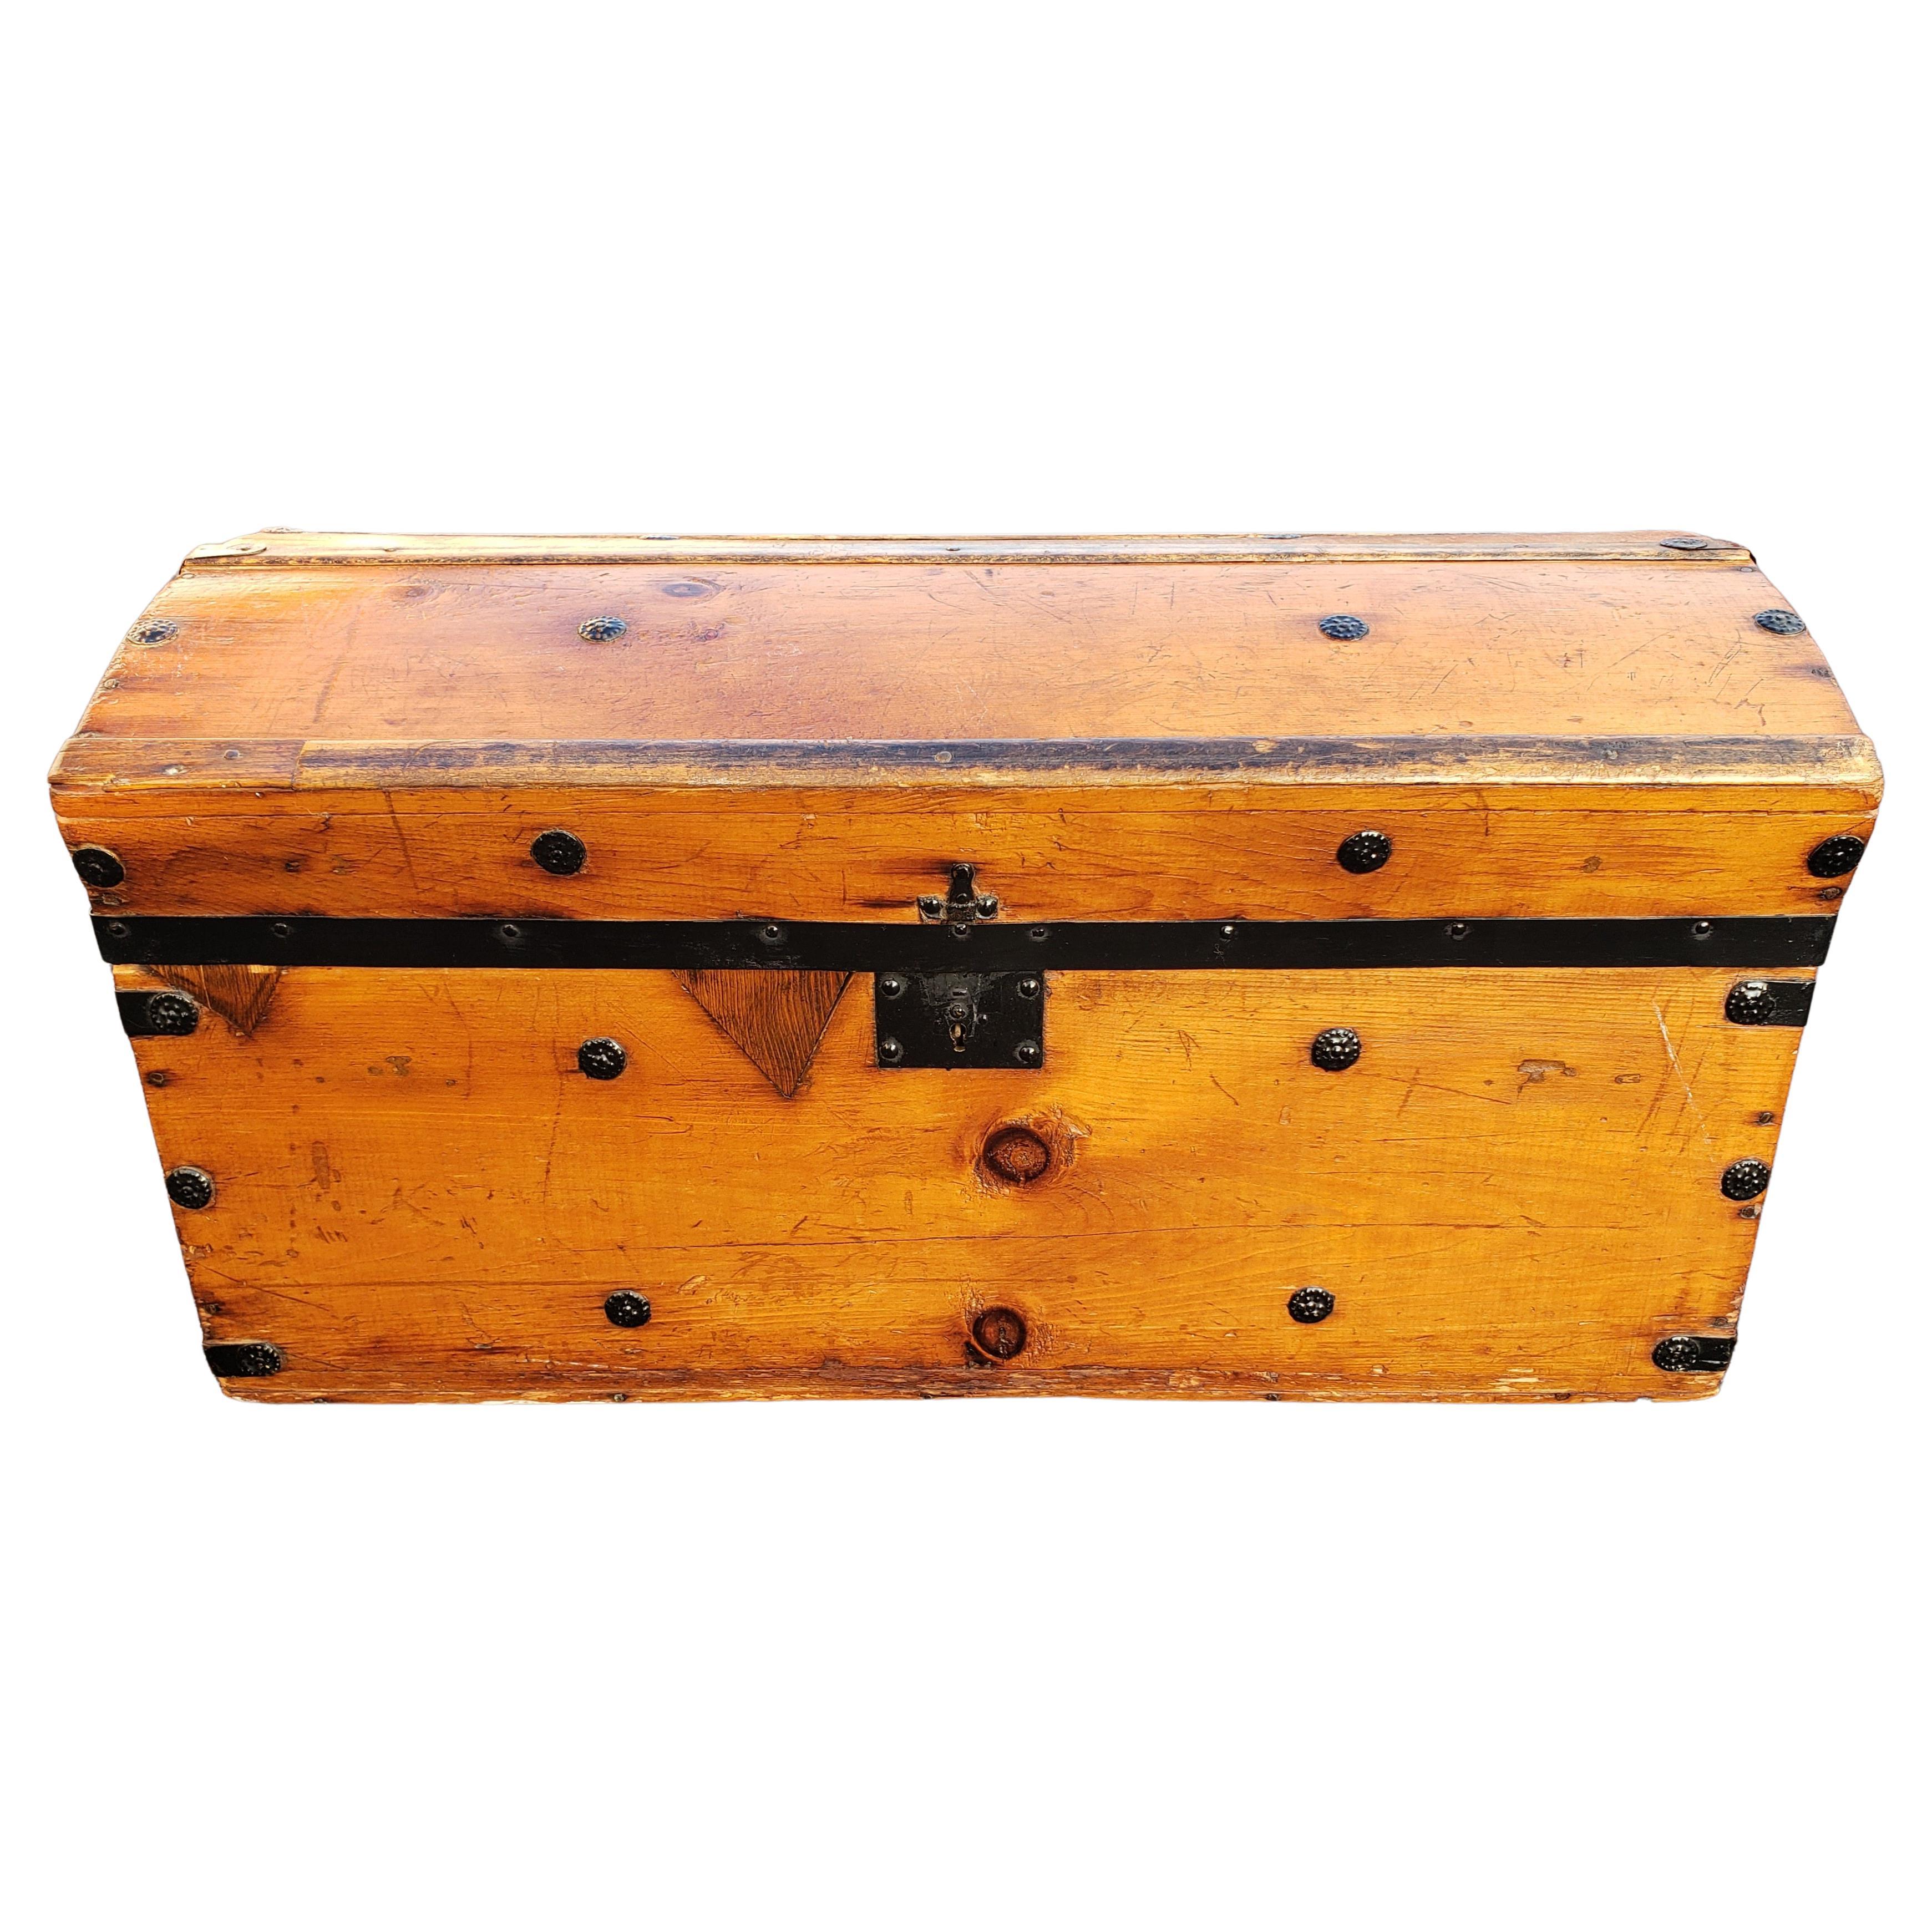 Vintage American Pine Trunk with Solid Wooden Handles, circa 1960s In Good Condition For Sale In Germantown, MD